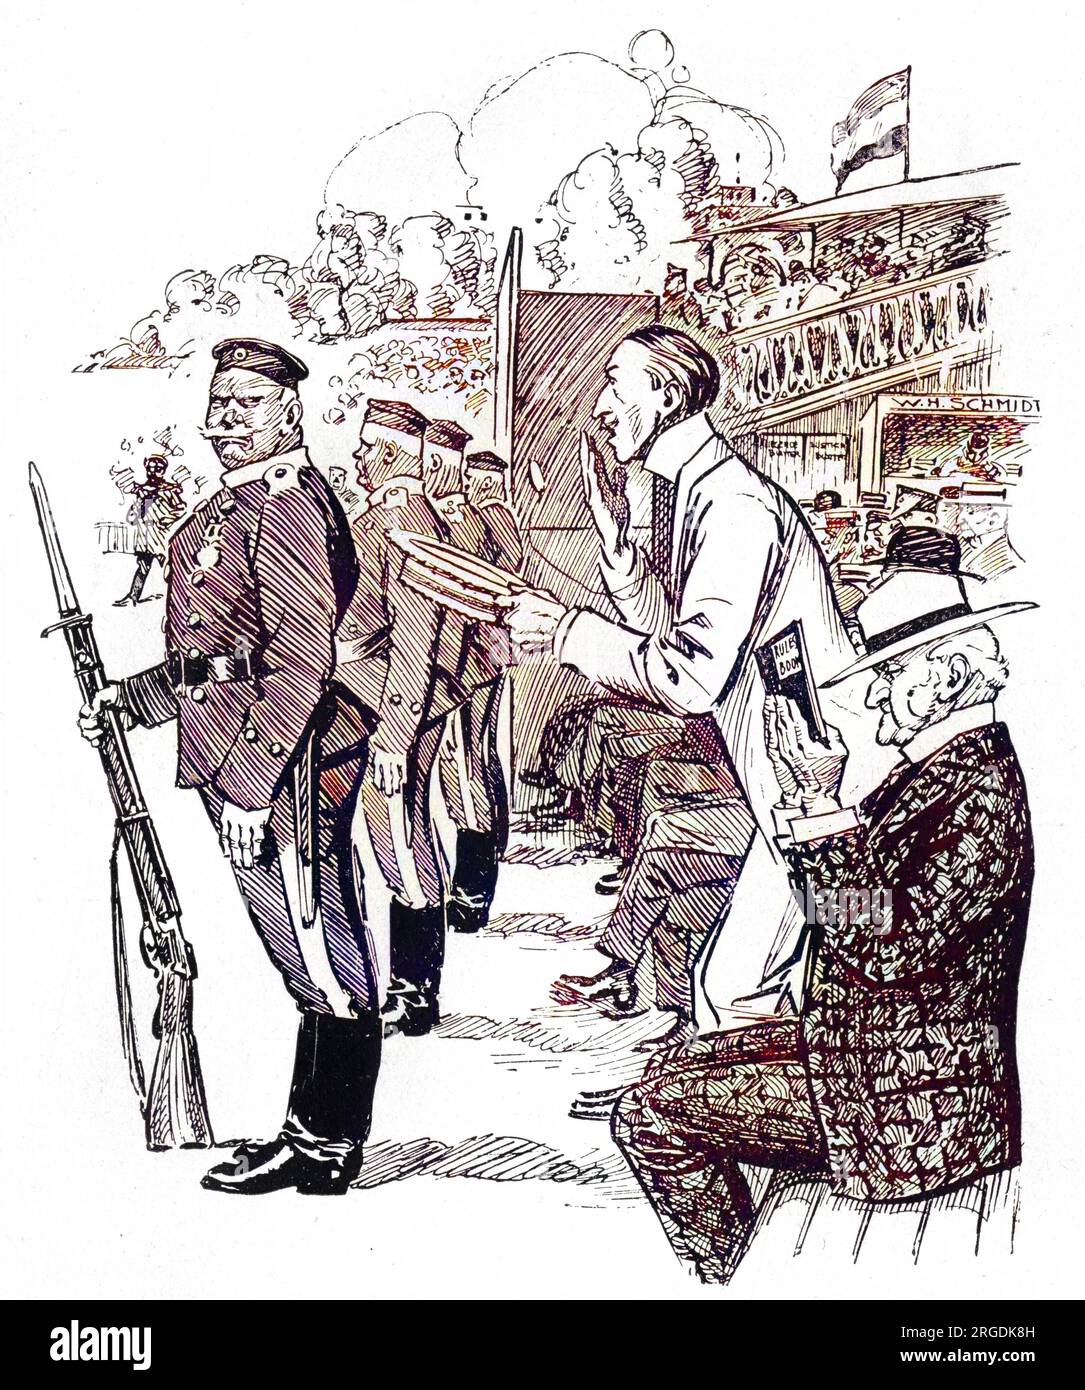 A light-hearted, humorous but also quite prescient look at what England might be like if German.  A scowl from a soldier with a bayonet reminds a spectator that cheering during a match is forbidden at Lord's cricket ground.  The cartoon reinforces stereotypes of the increasingly militarised German nation leading up to the outbreak of World War I. Stock Photo